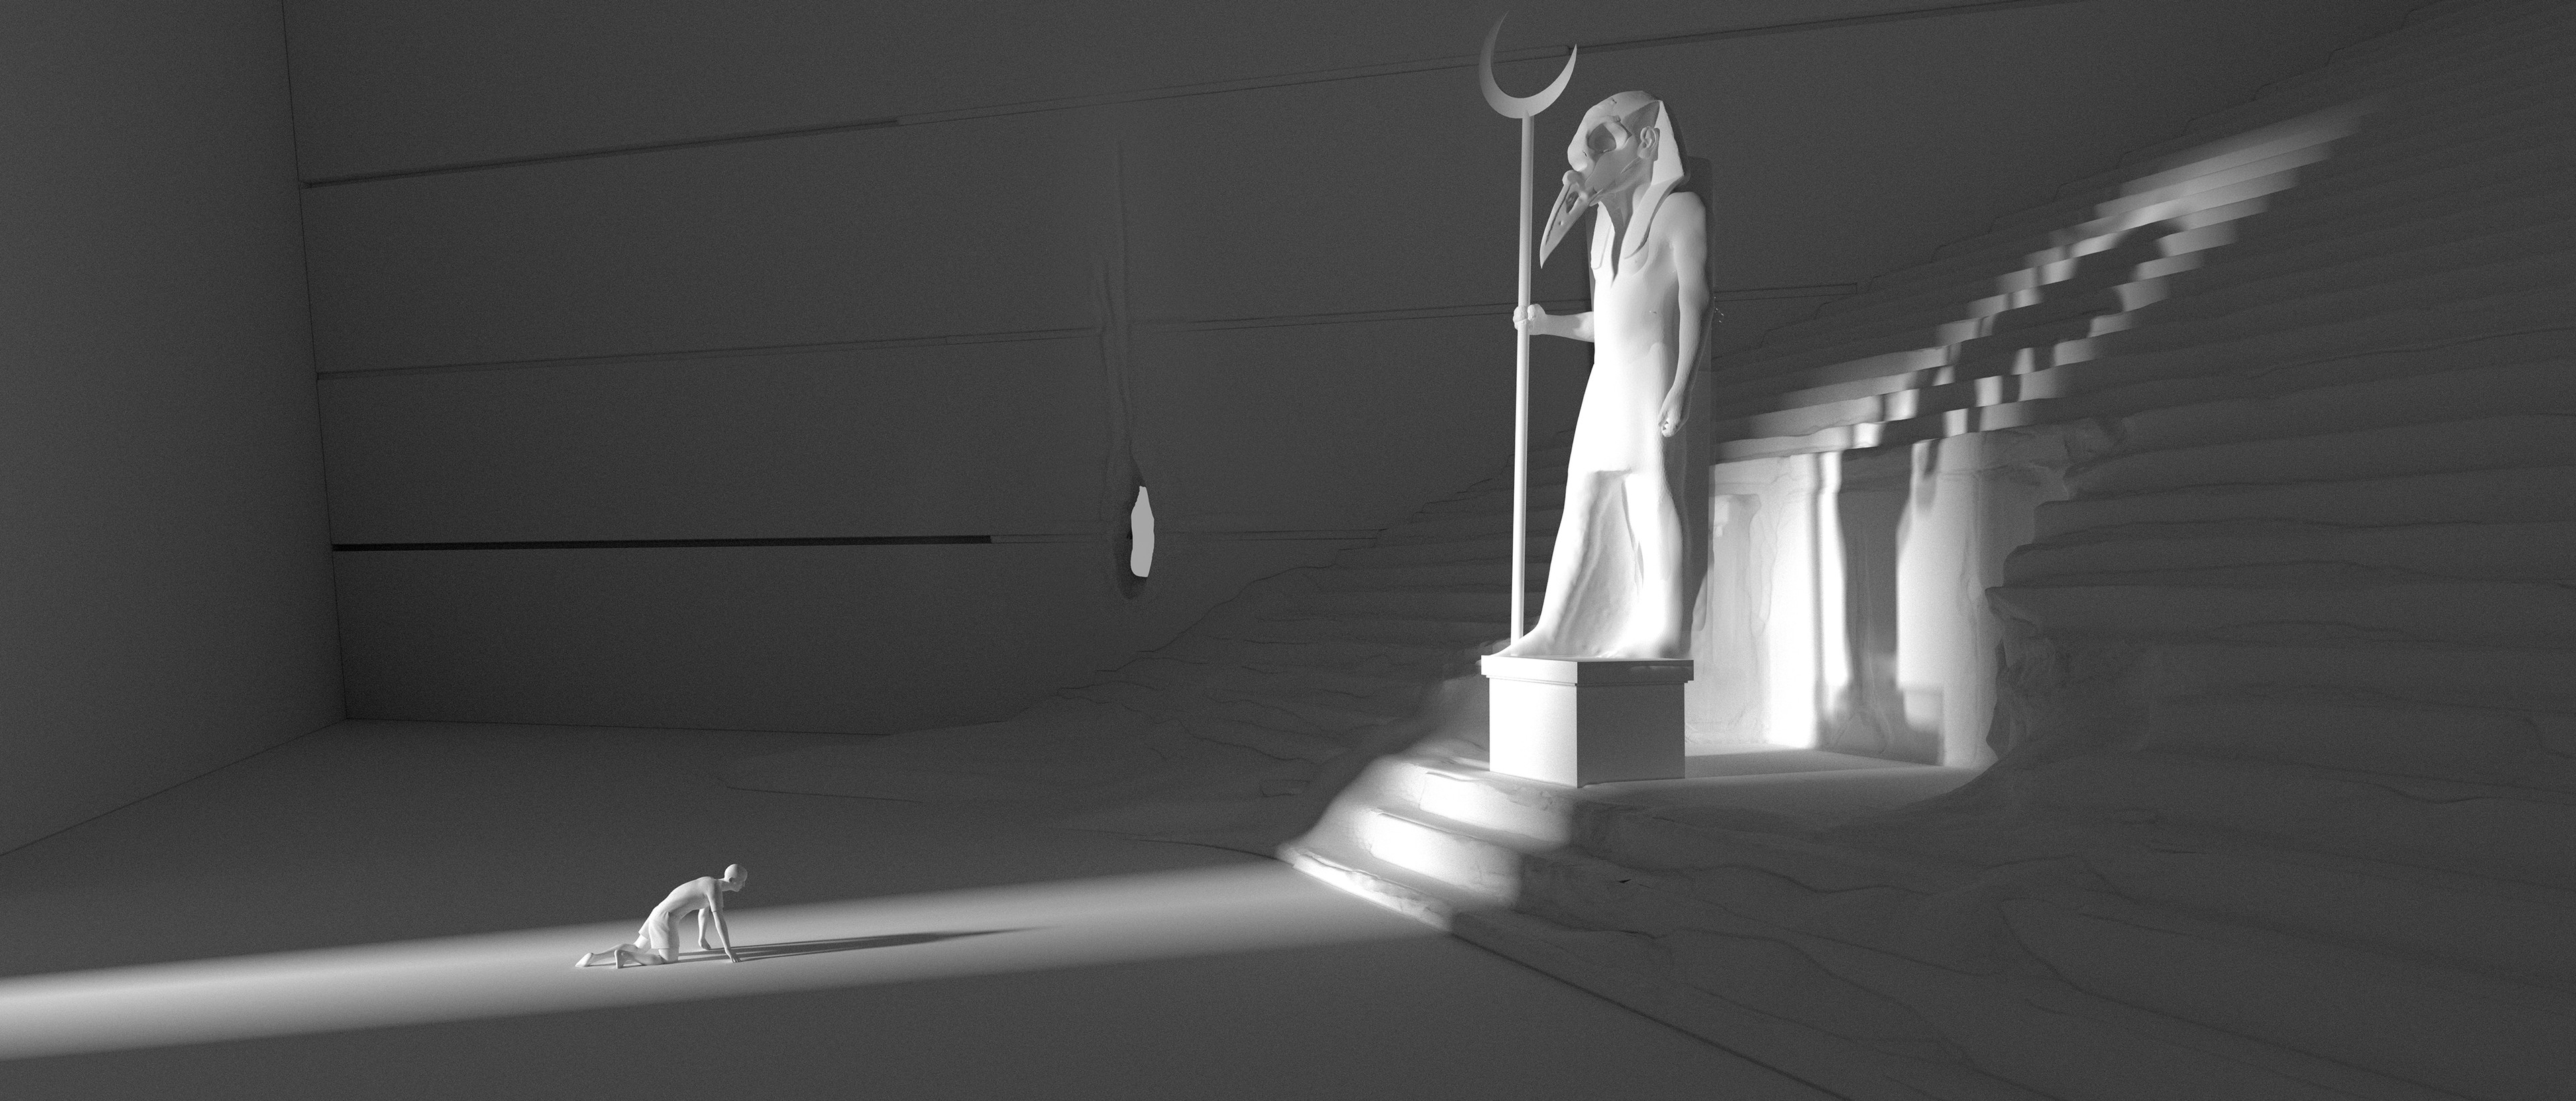 Early model used for these initial series of concepts. This allowed for accurate placement of cameras within the scene and lighting. I loved the idea of a strong light source coming through the entrance and framing Marc and the statue of Khonshu